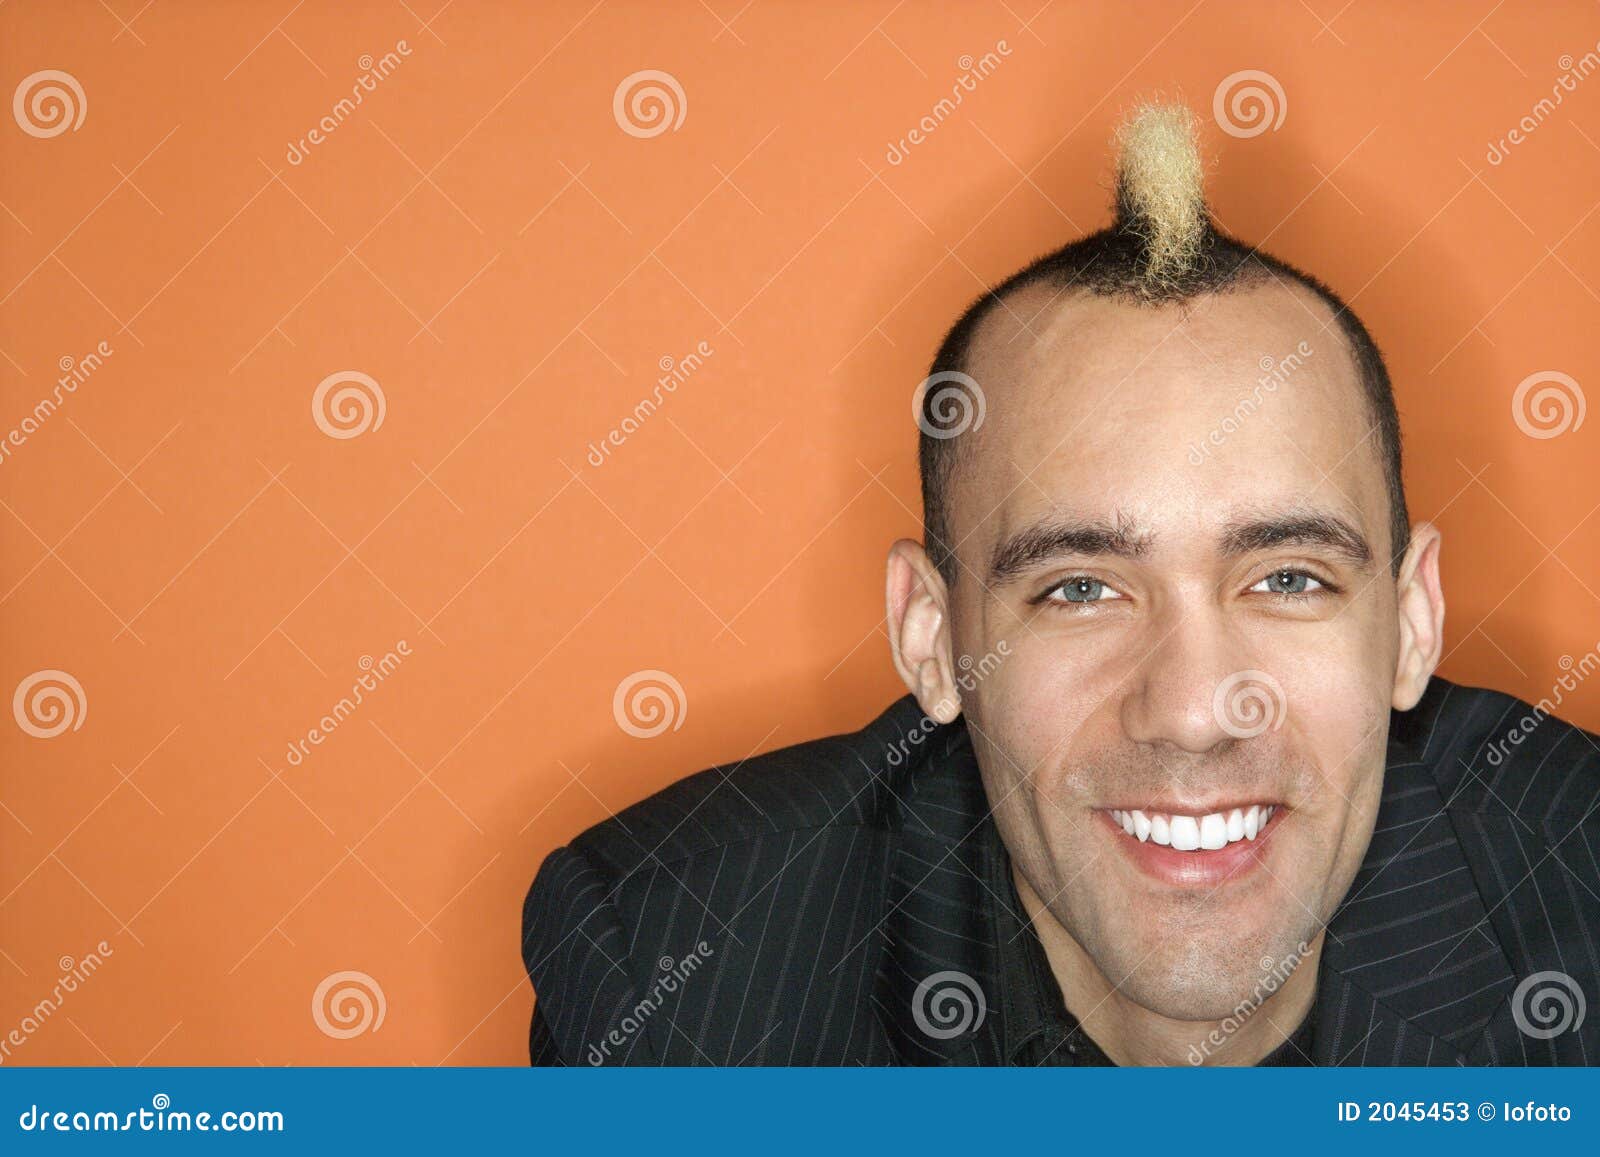 businessman with mohawk.